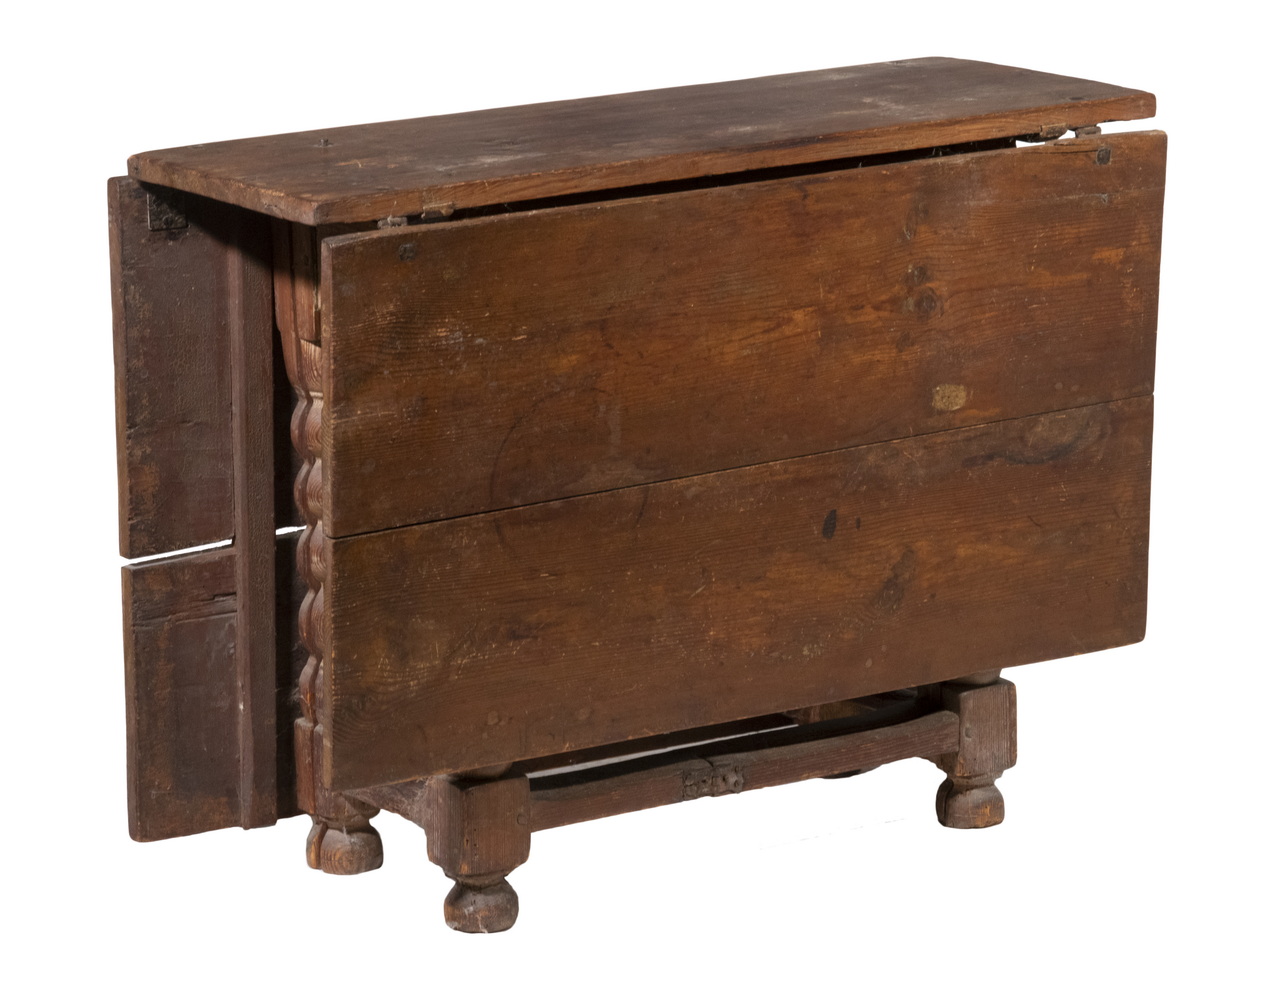 EARLY DROP LEAF TABLE 17th c. Rectangular